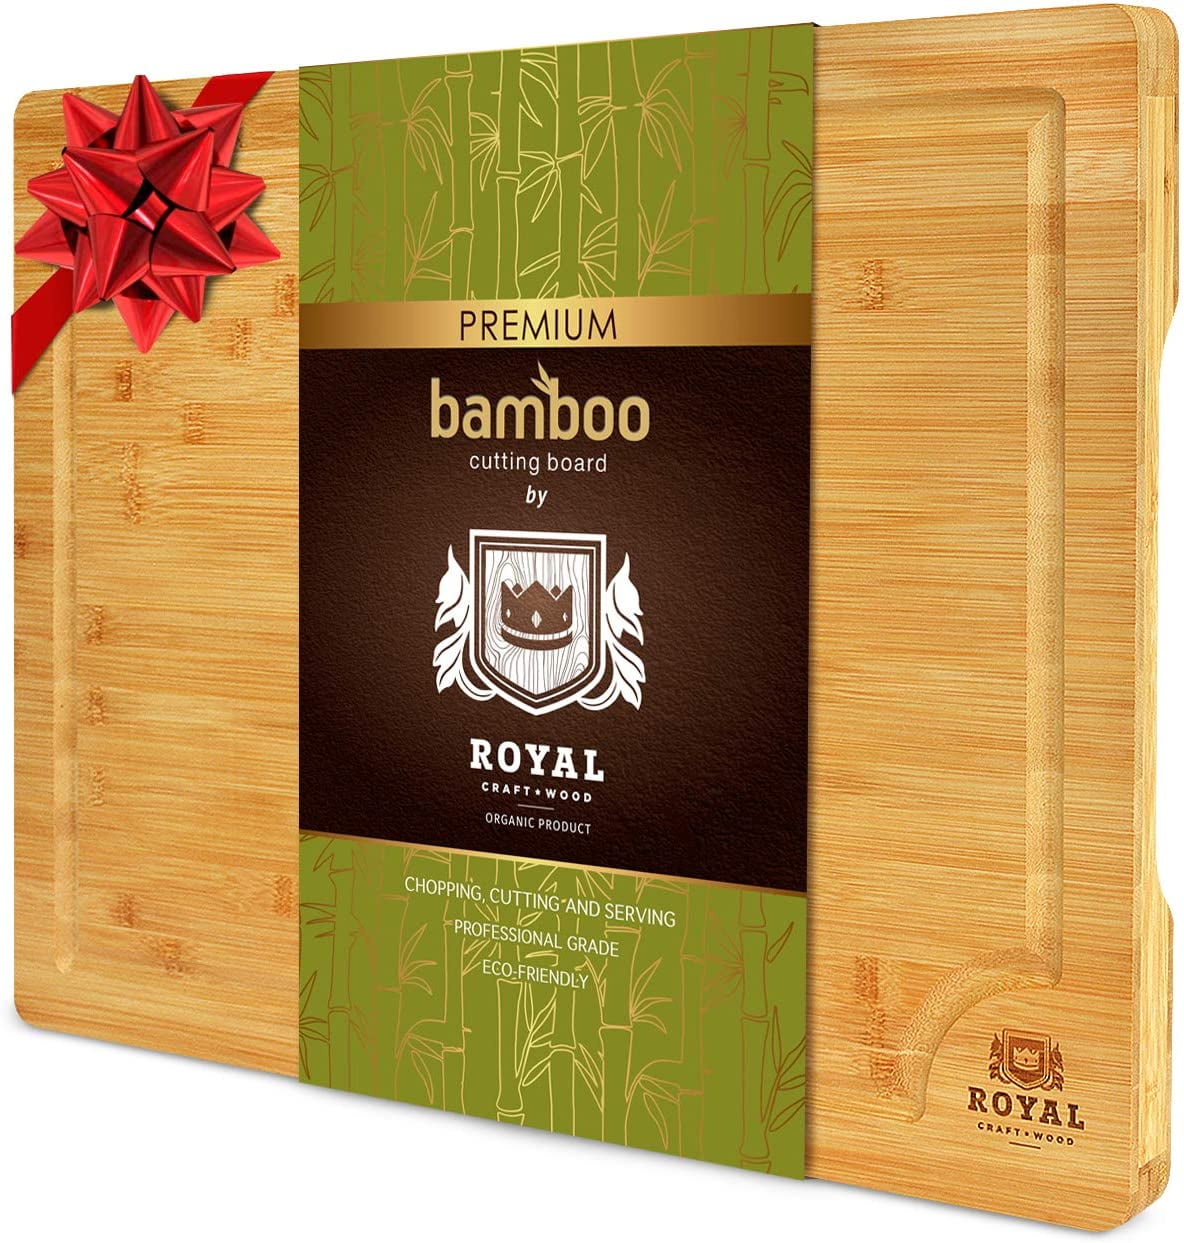 EXTRA LARGE Organic Bamboo Cutting Board with Juice Groove Anti Microbial Heavy Duty Serving Tray w/Handles Butcher Block 18 x 12 Cheese and Vegetables Best Kitchen Chopping Board for Meat